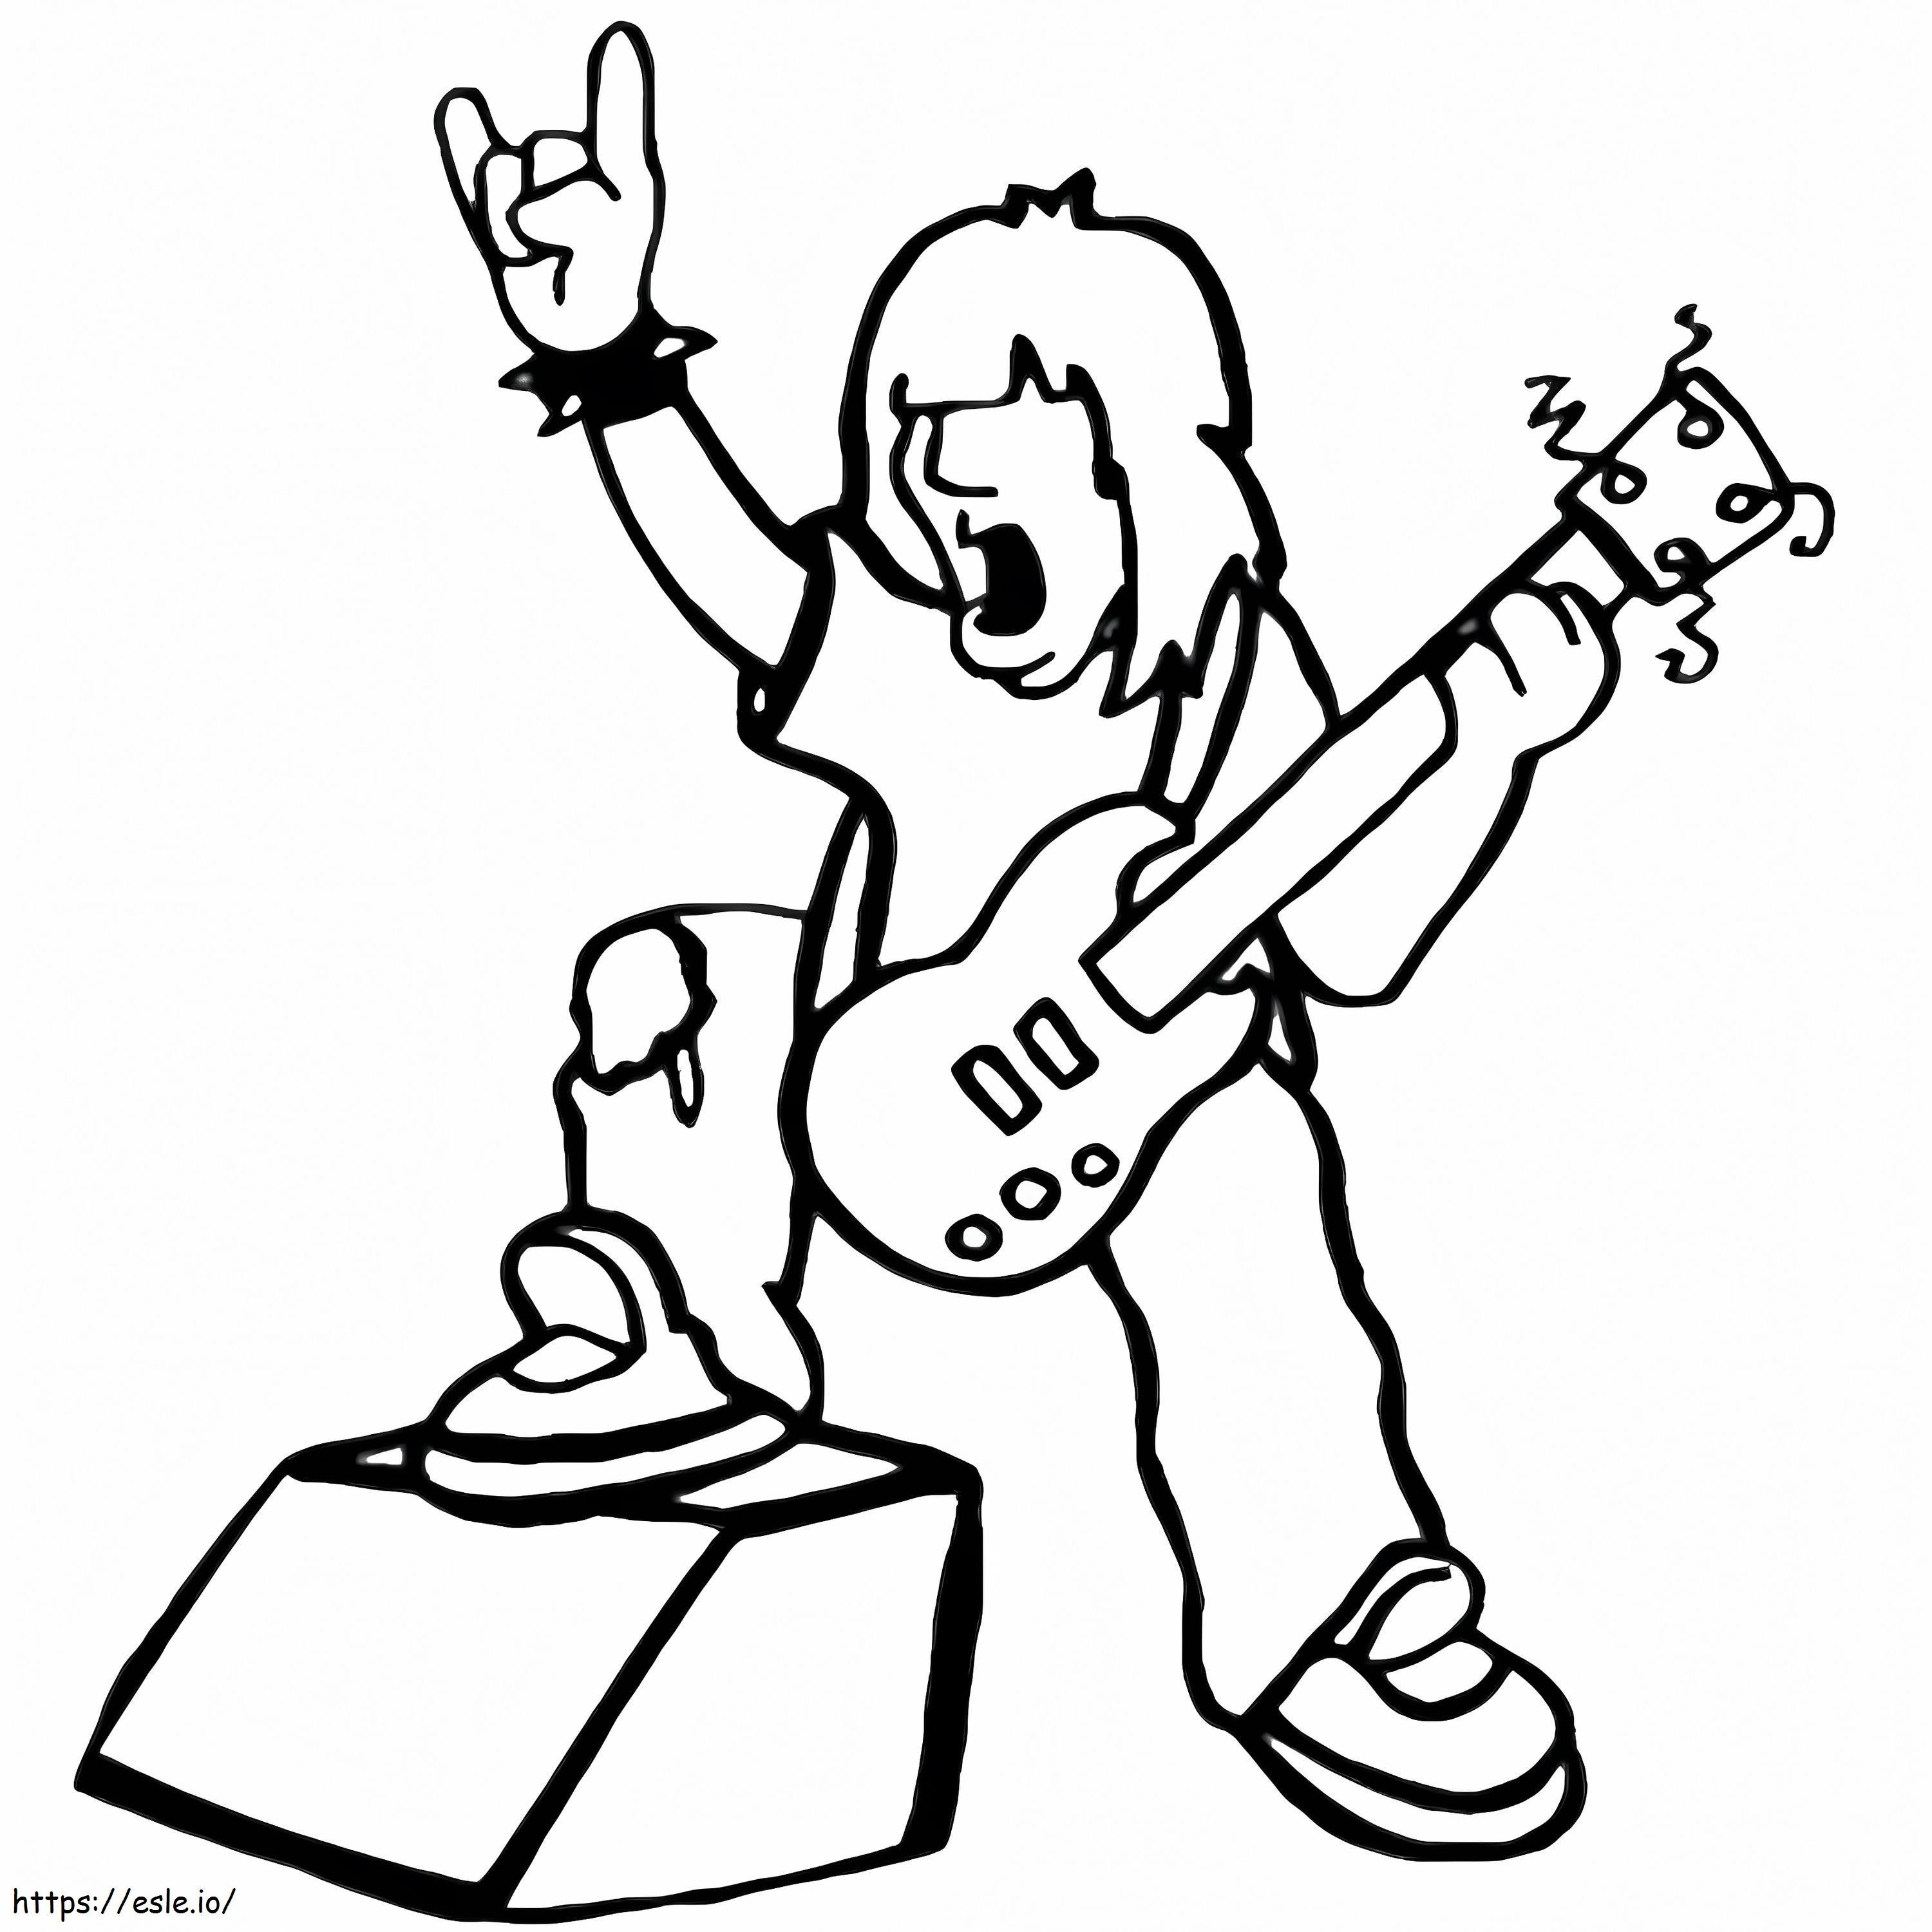 Awesome Rockstar coloring page